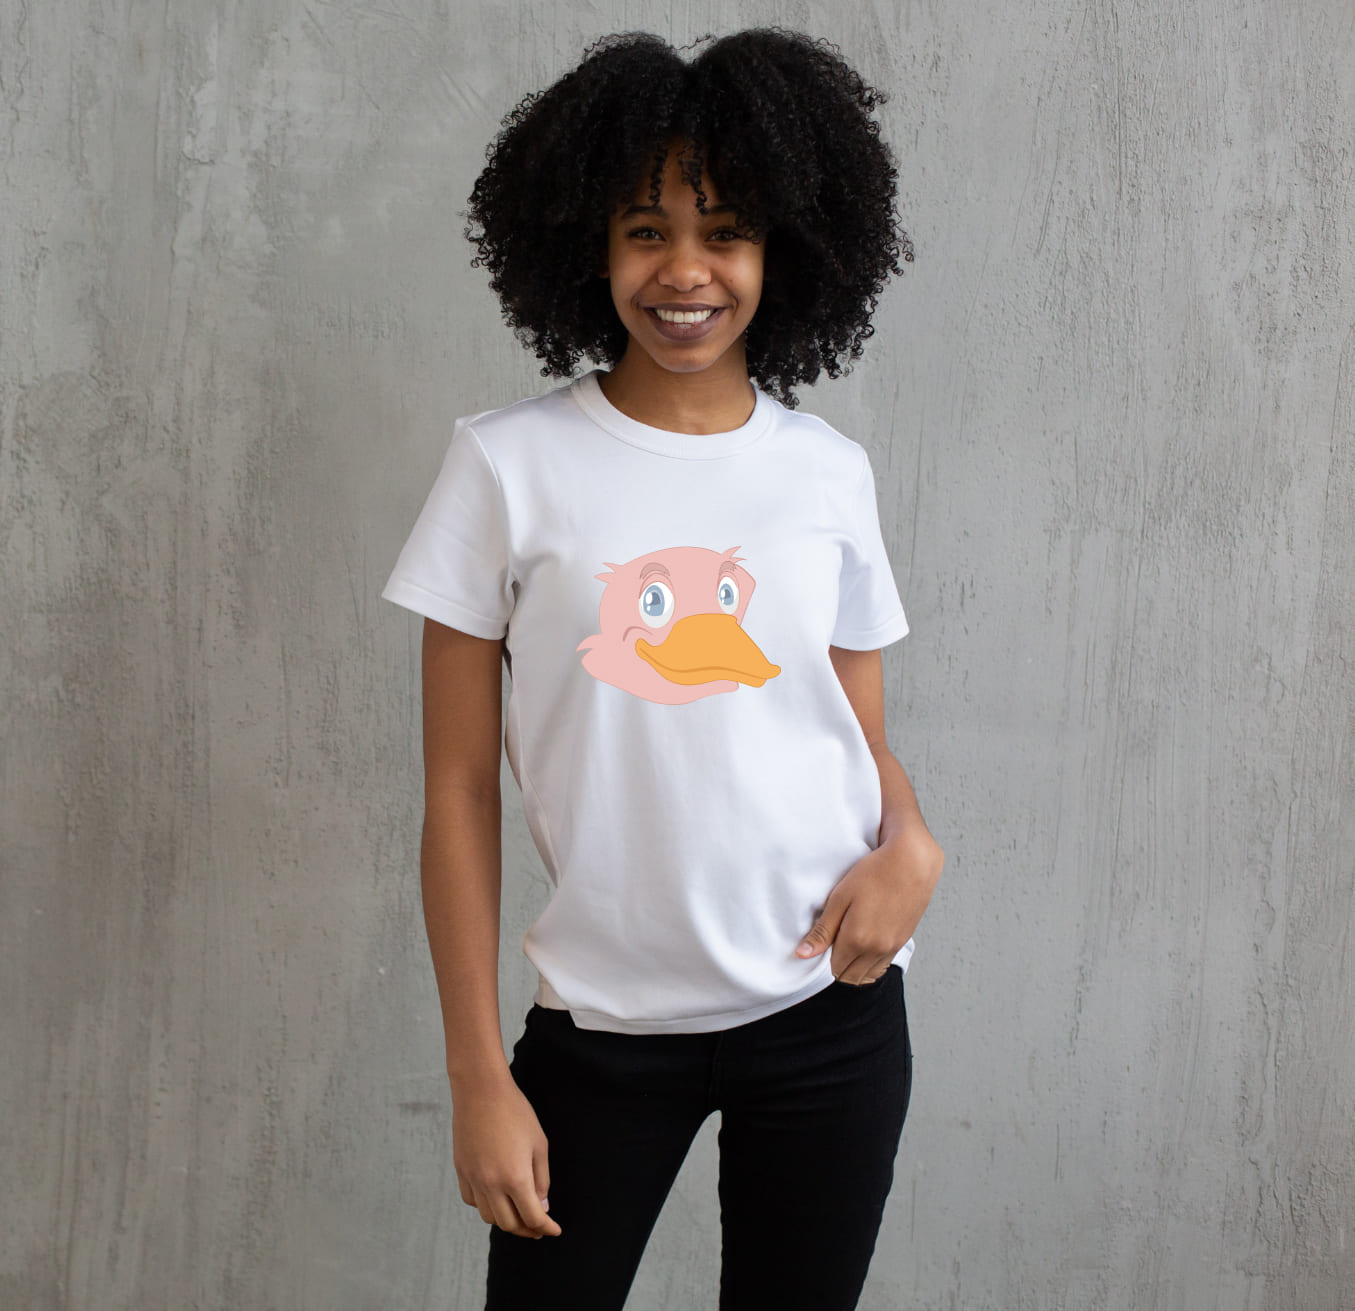 The image of a white t-shirt with an enchanting print of the head of a pink duck.